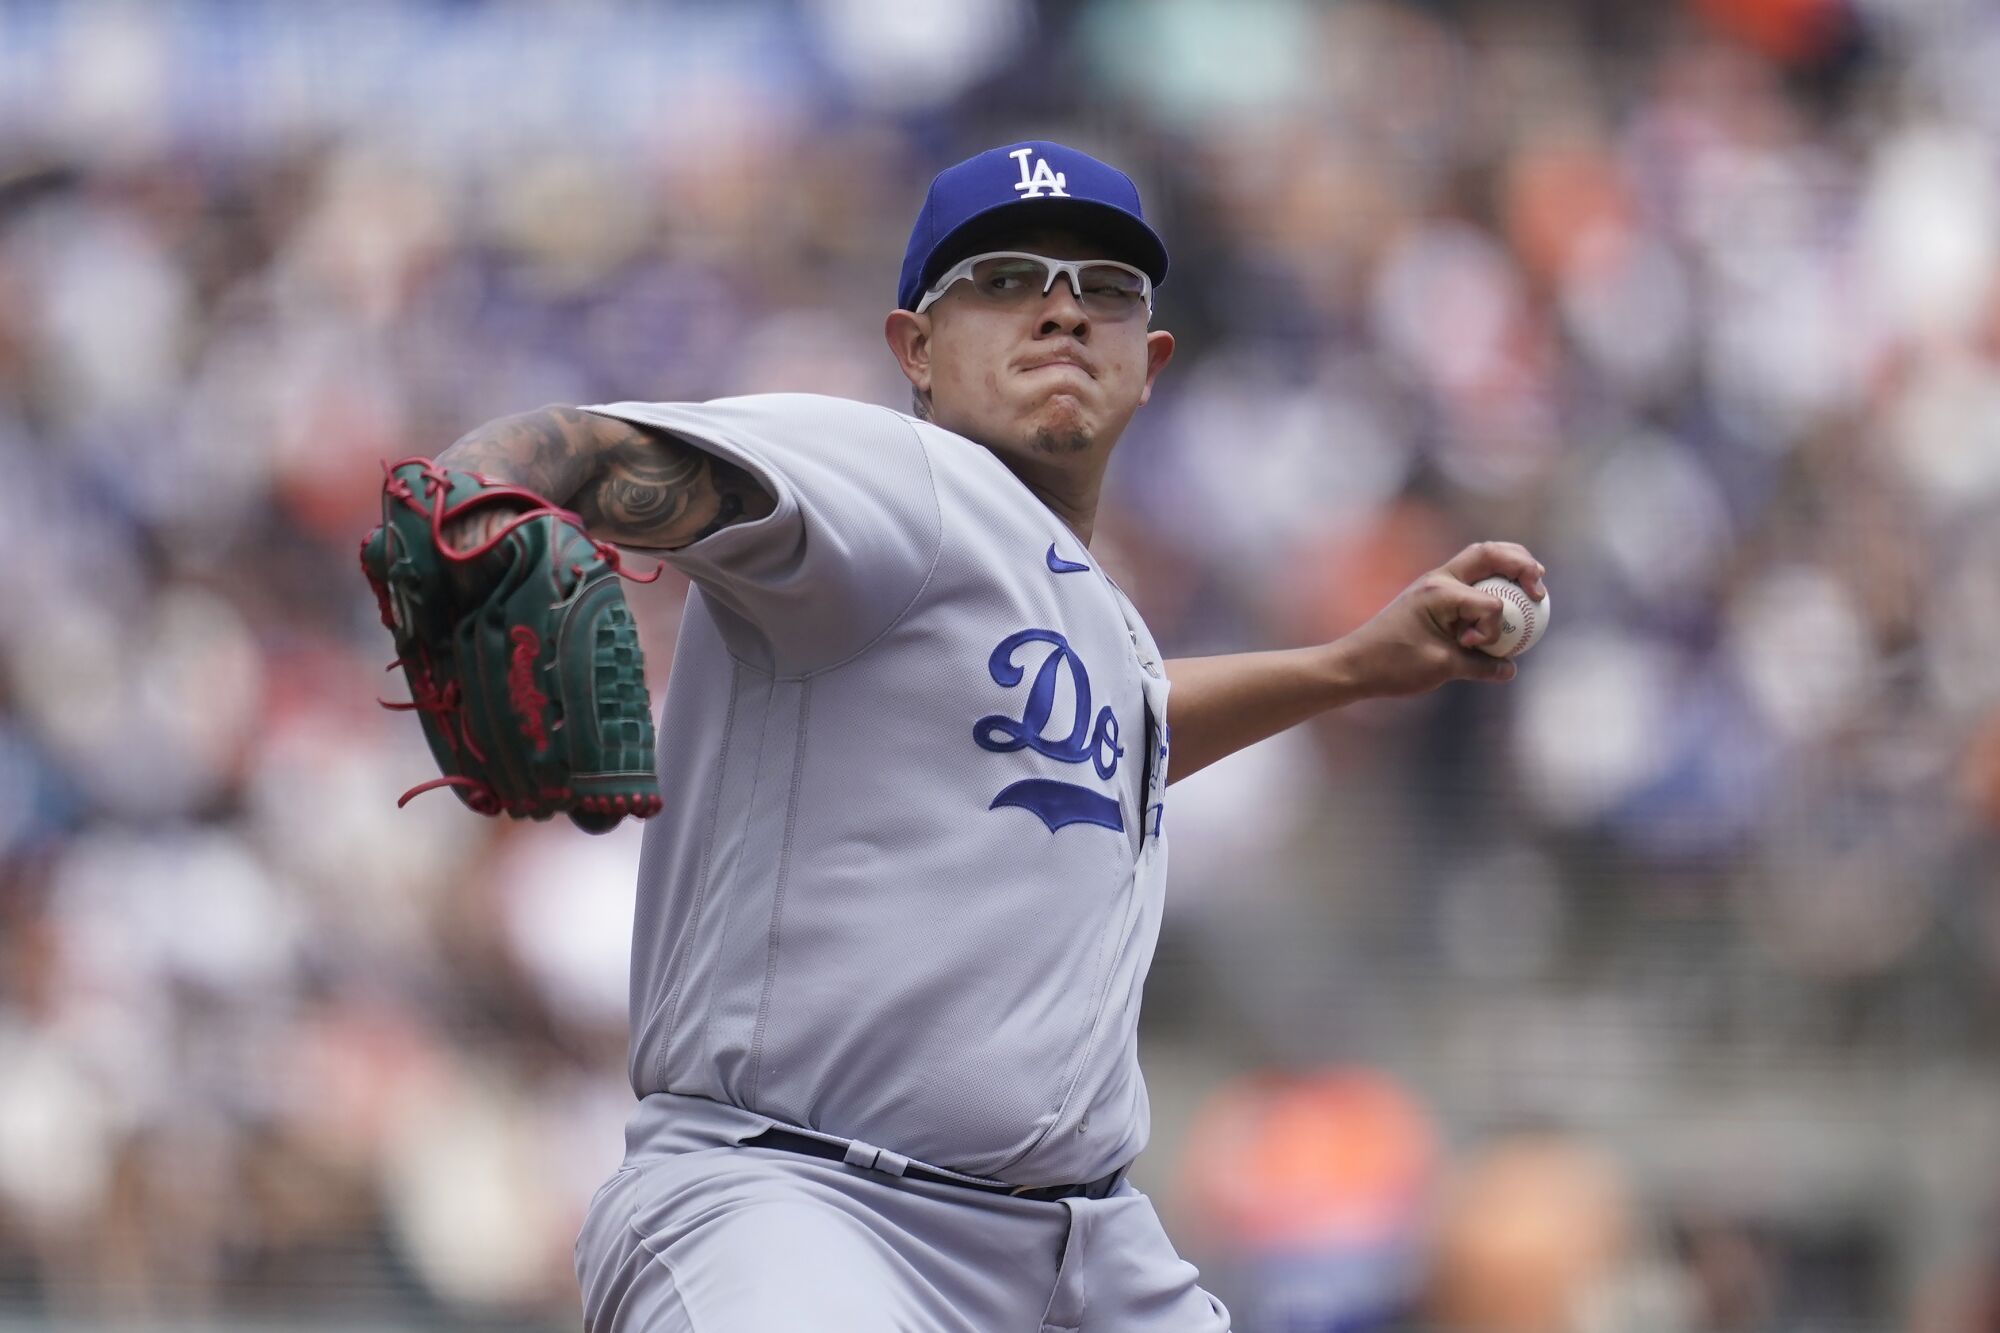 Los Angeles Dodgers' Julio Urias pitches against the San Francisco Giants.